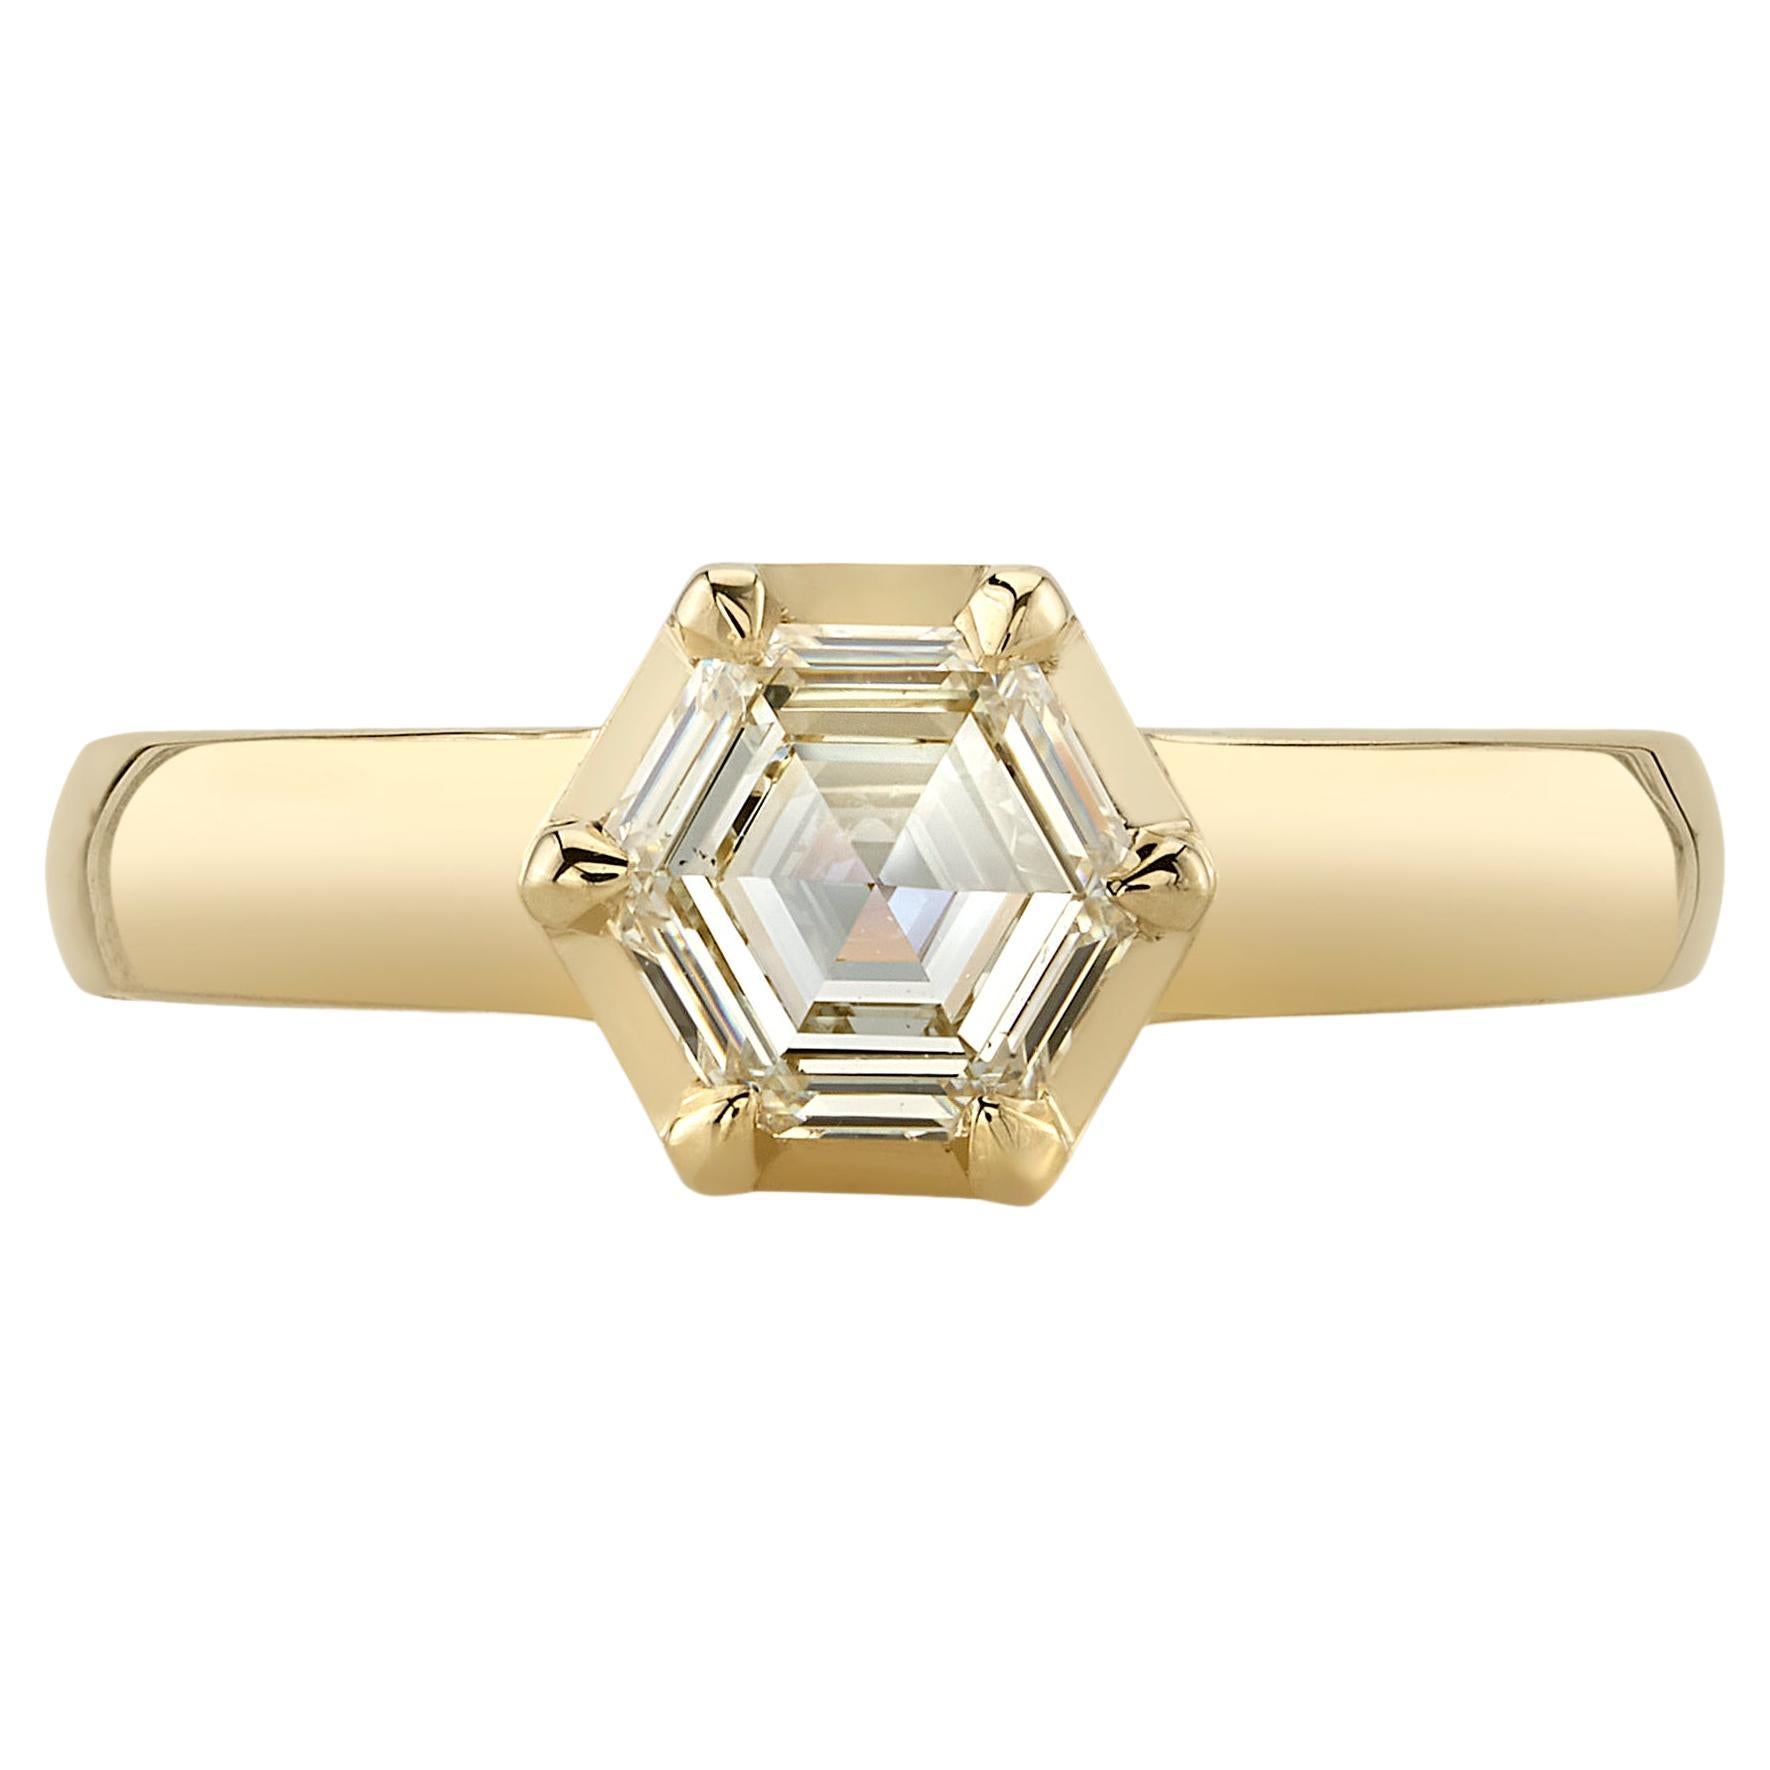 Handcrafted Odette Hexagonal Step Cut Diamond Ring by Single Stone For Sale